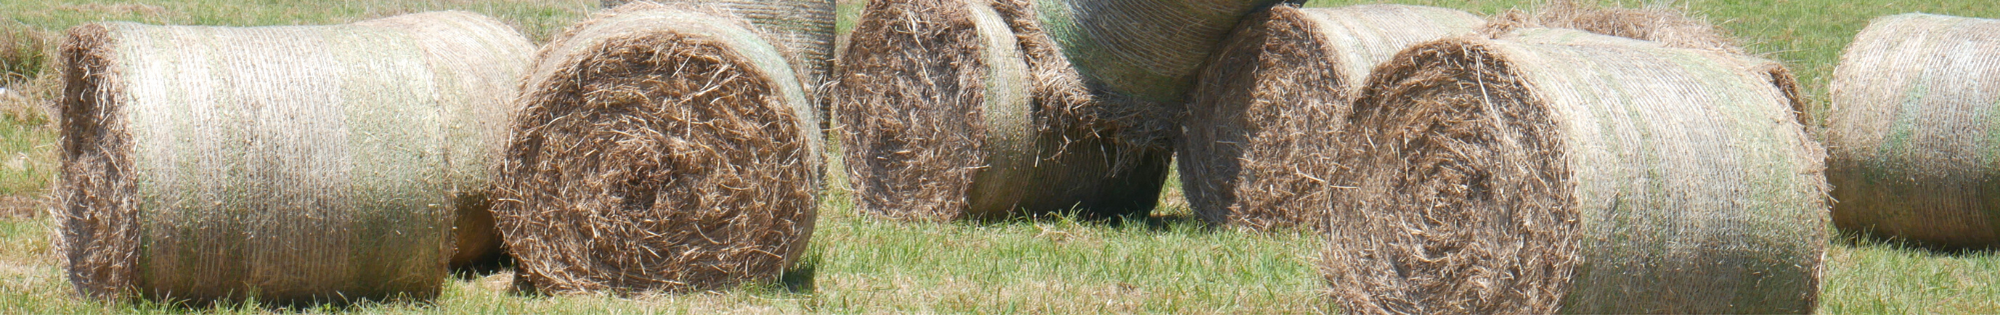 Hay bales in field, baled materials